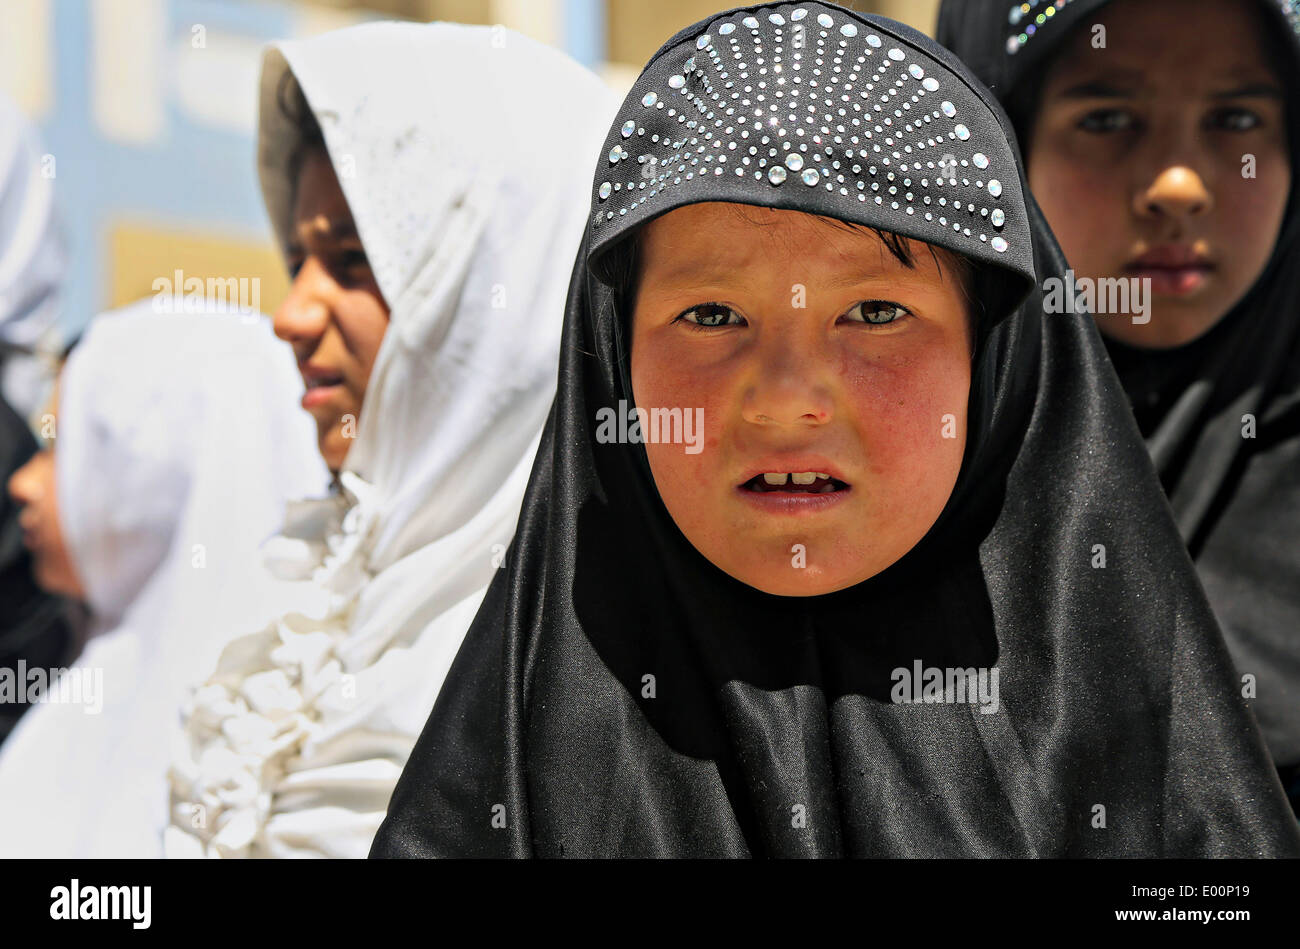 A young Afghan girl during humanitarian aid distribution at a school April 16, 2014 in Kandahar, Kandahar province, Afghanistan. Stock Photo